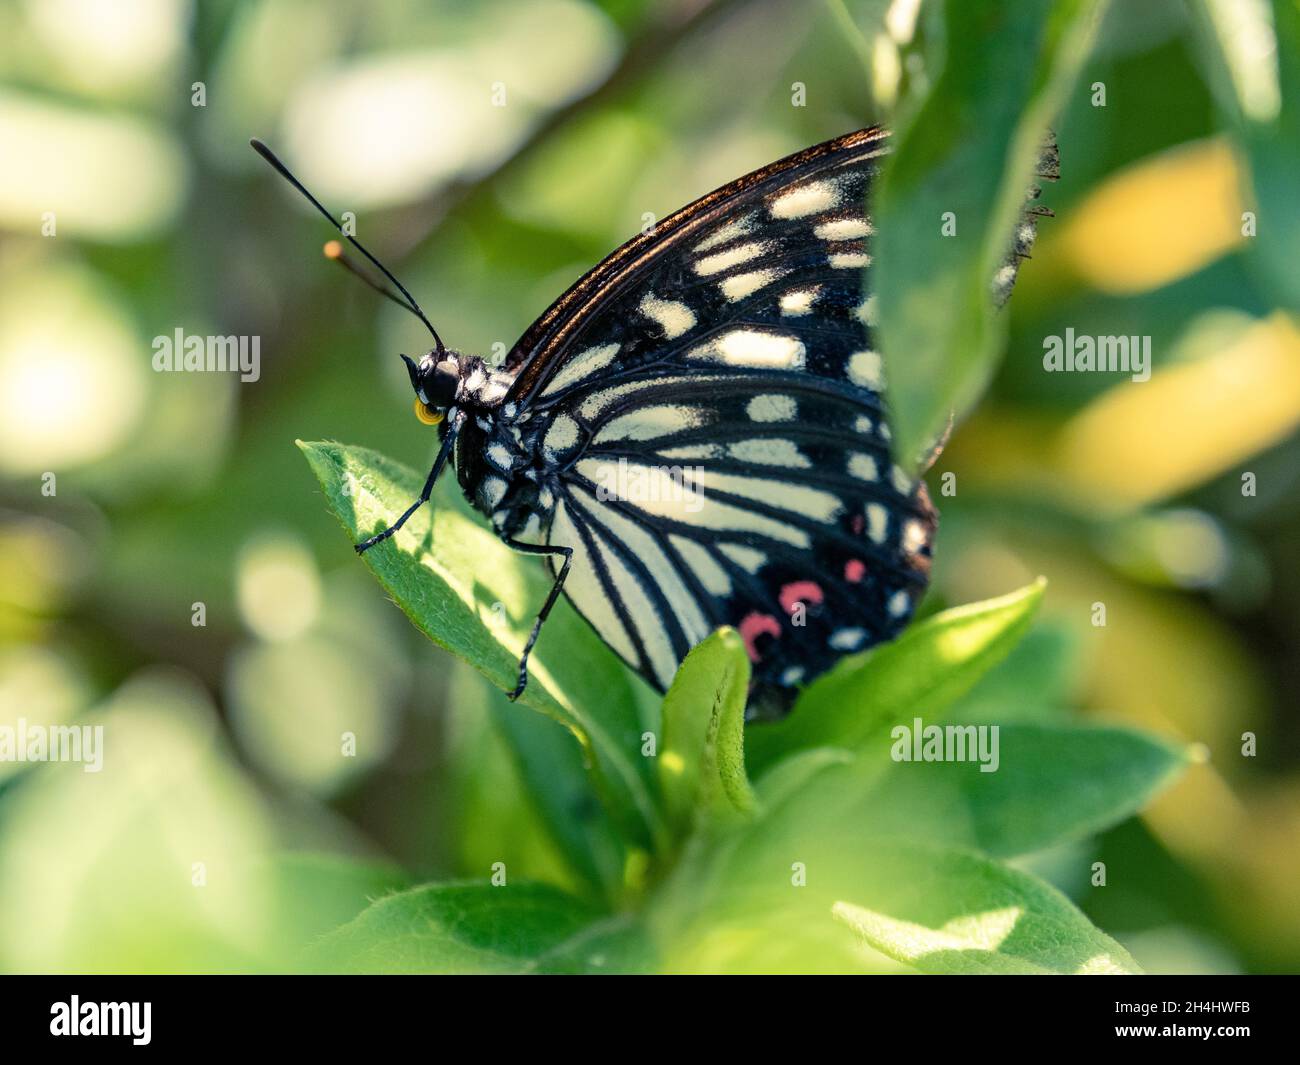 Close-up shot of a beautiful Hestina assimilis or Red Ring Skirt butterfly  on a leaf in the park Stock Photo